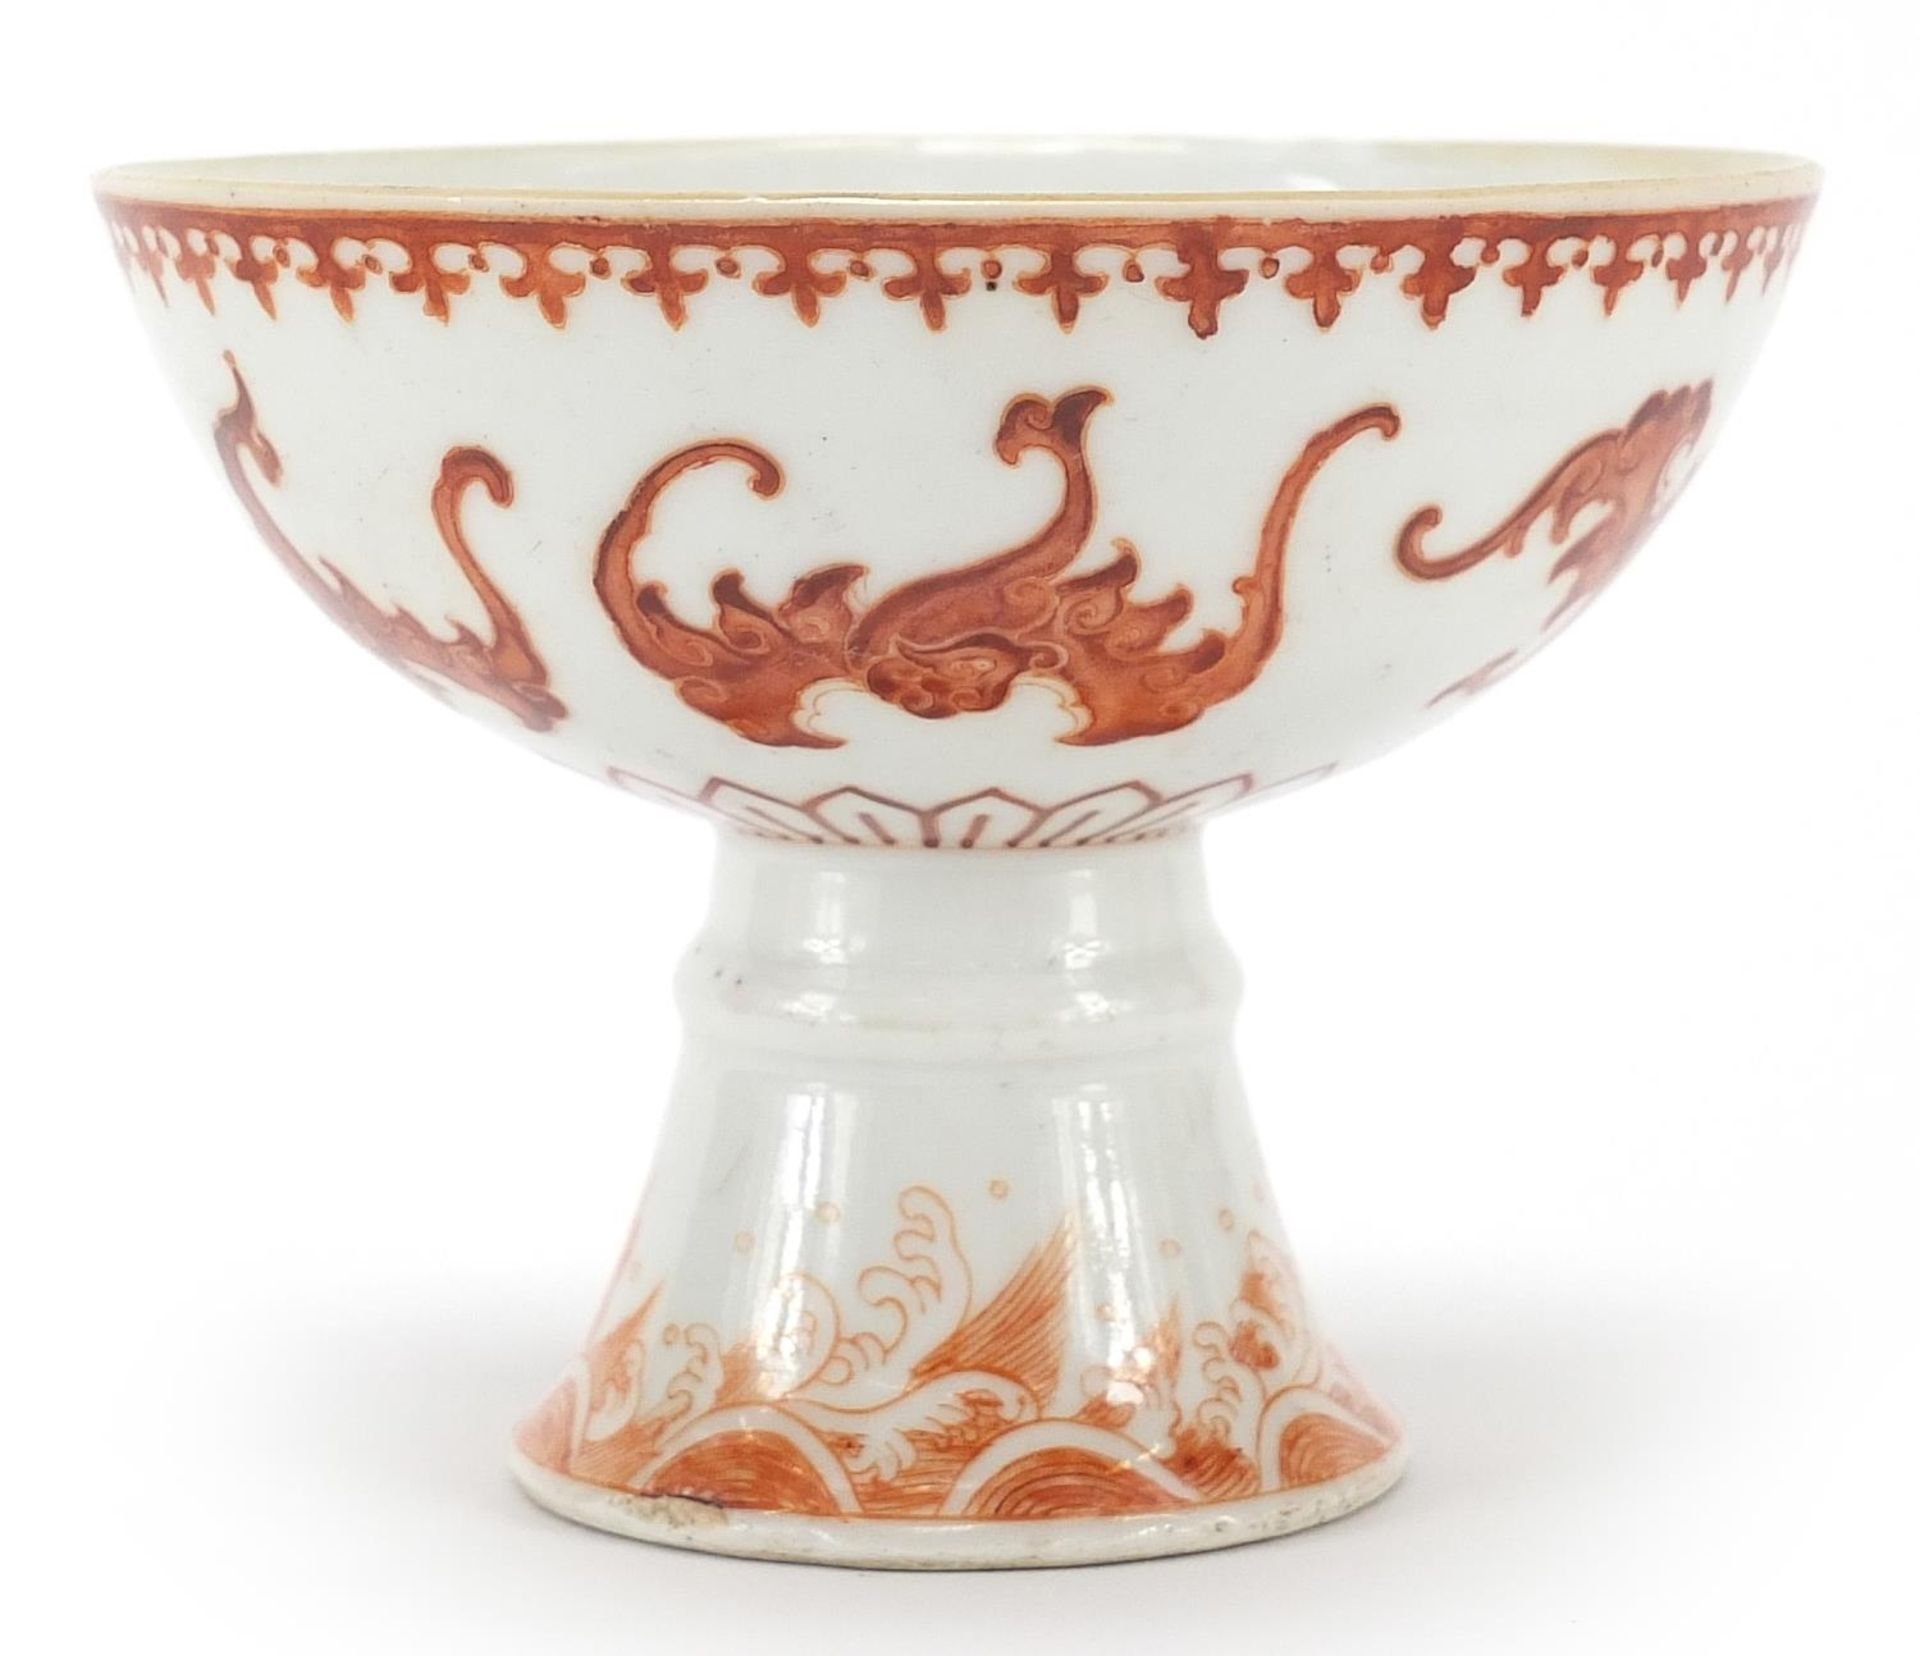 Chinese porcelain stem bowl hand painted in iron red with bats and crashing waves, six figure